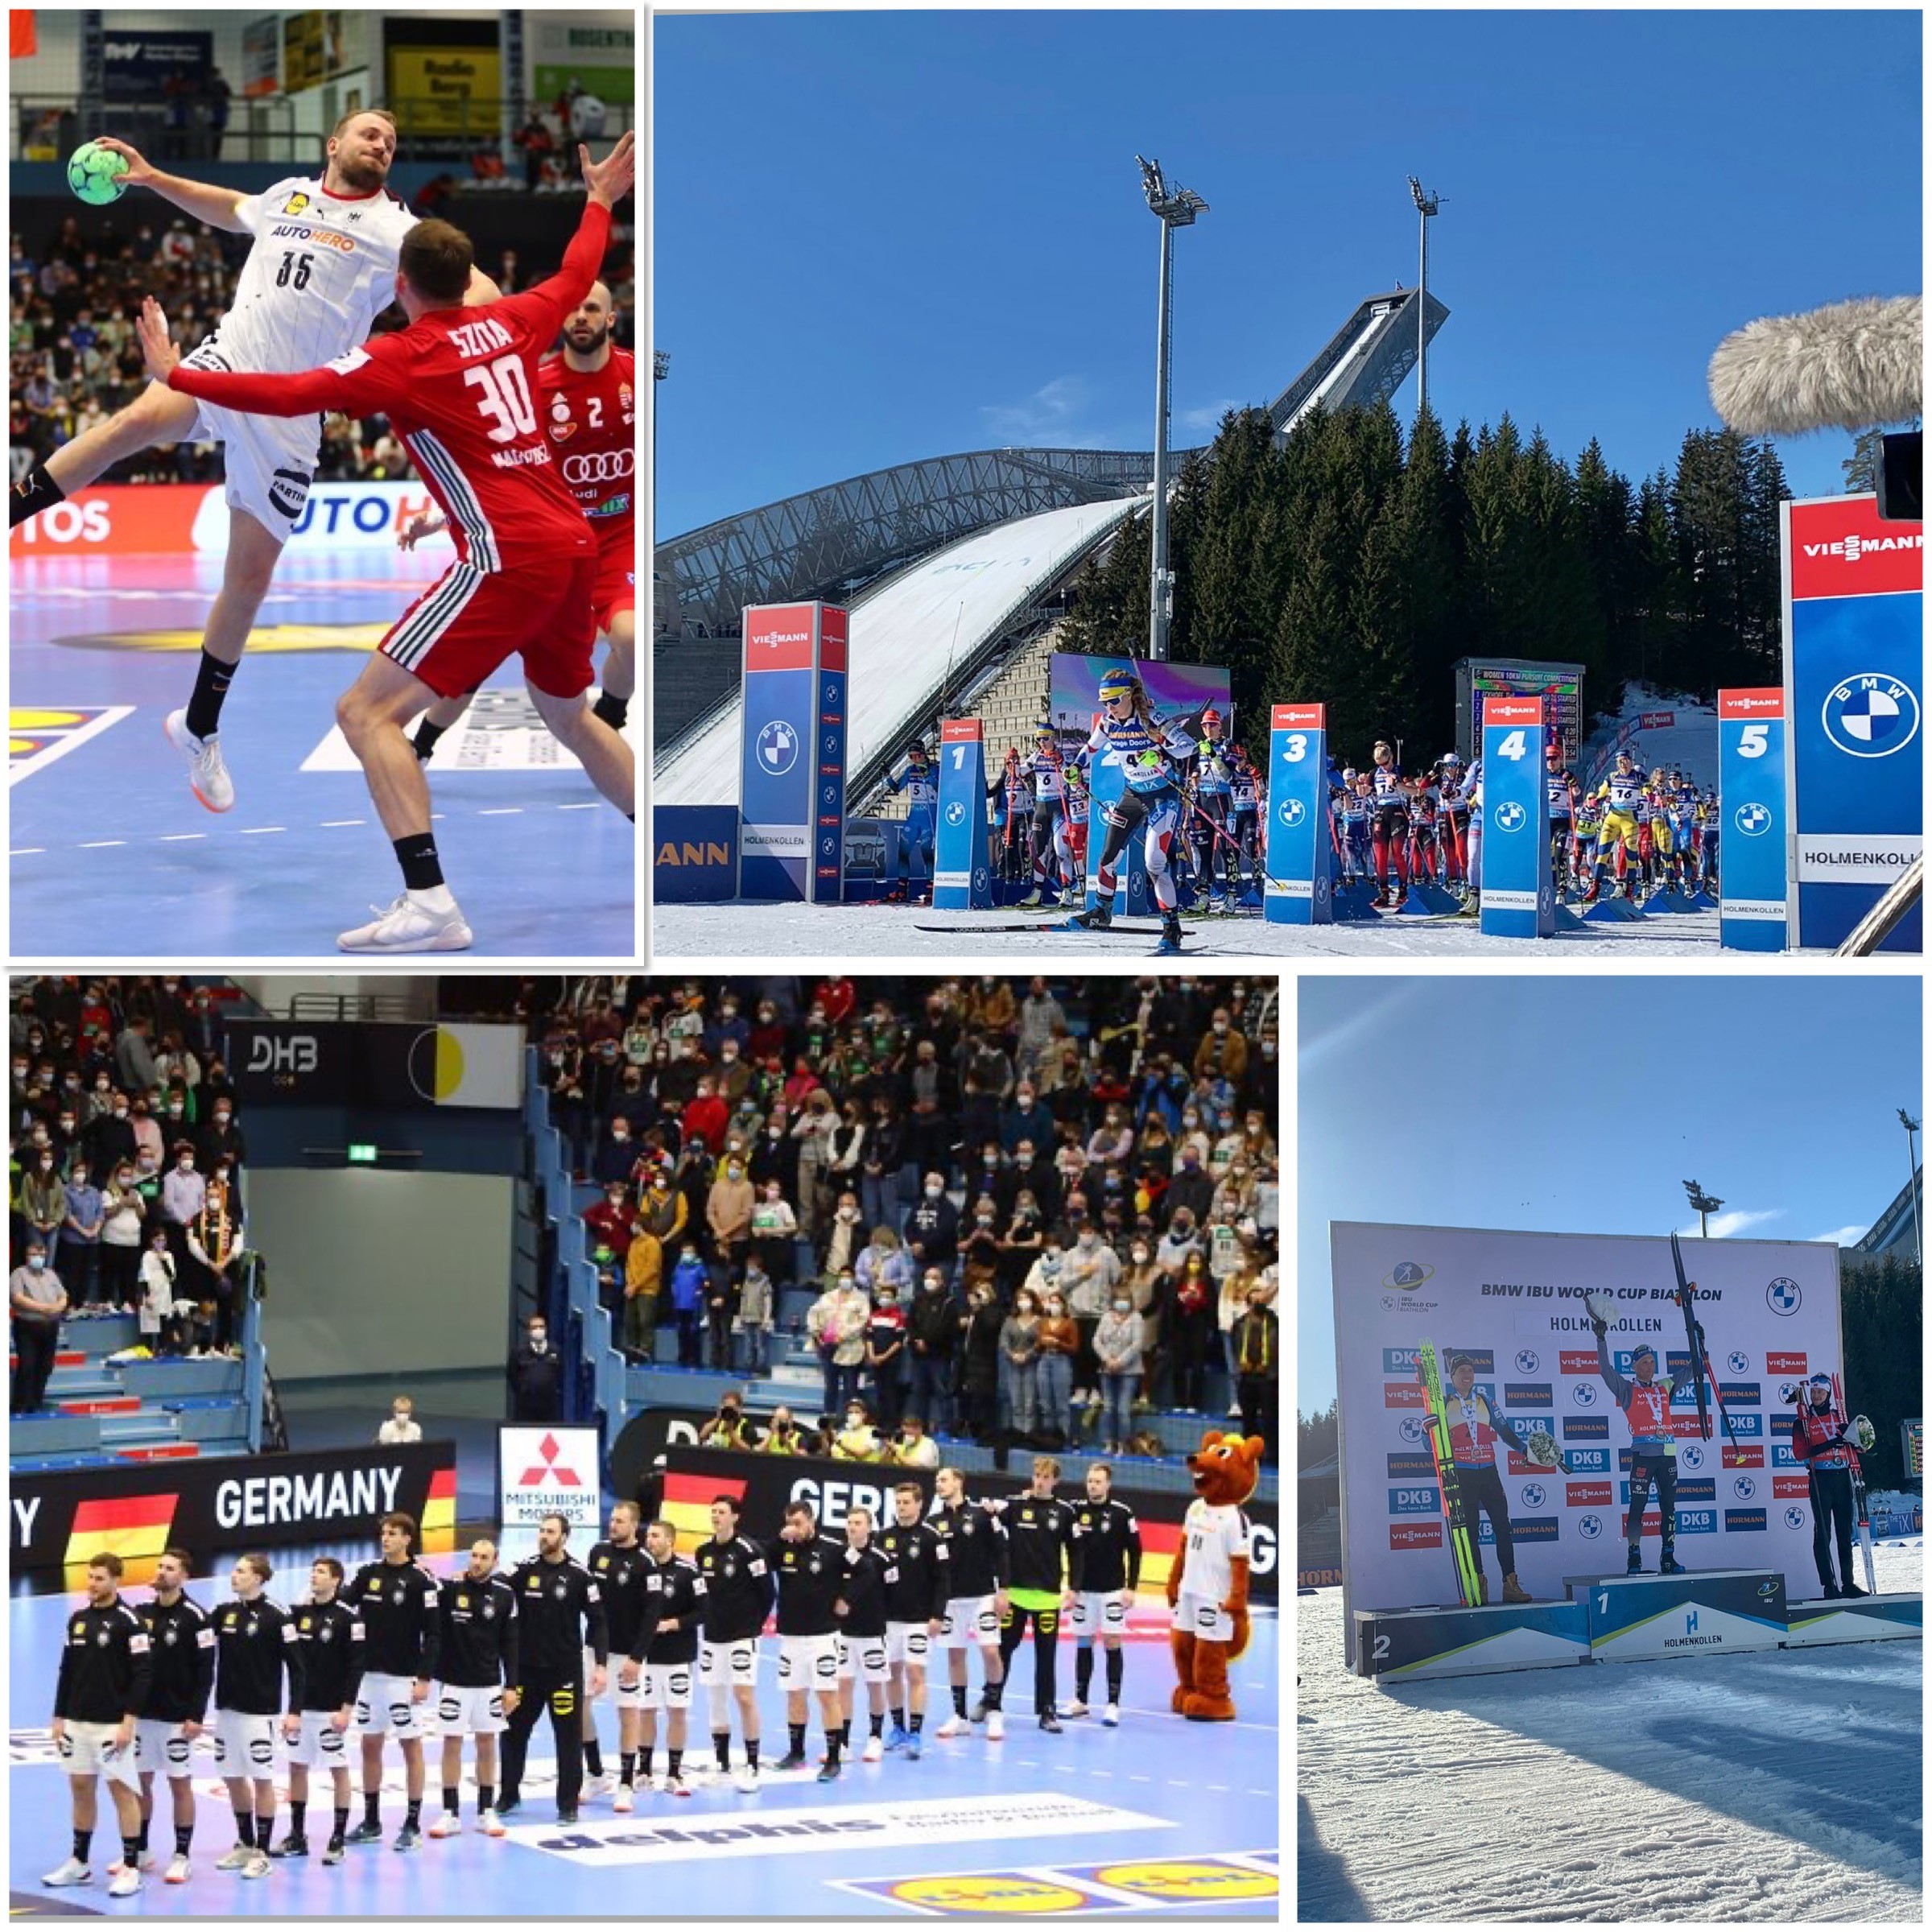 What do biathlon and handball have in common?